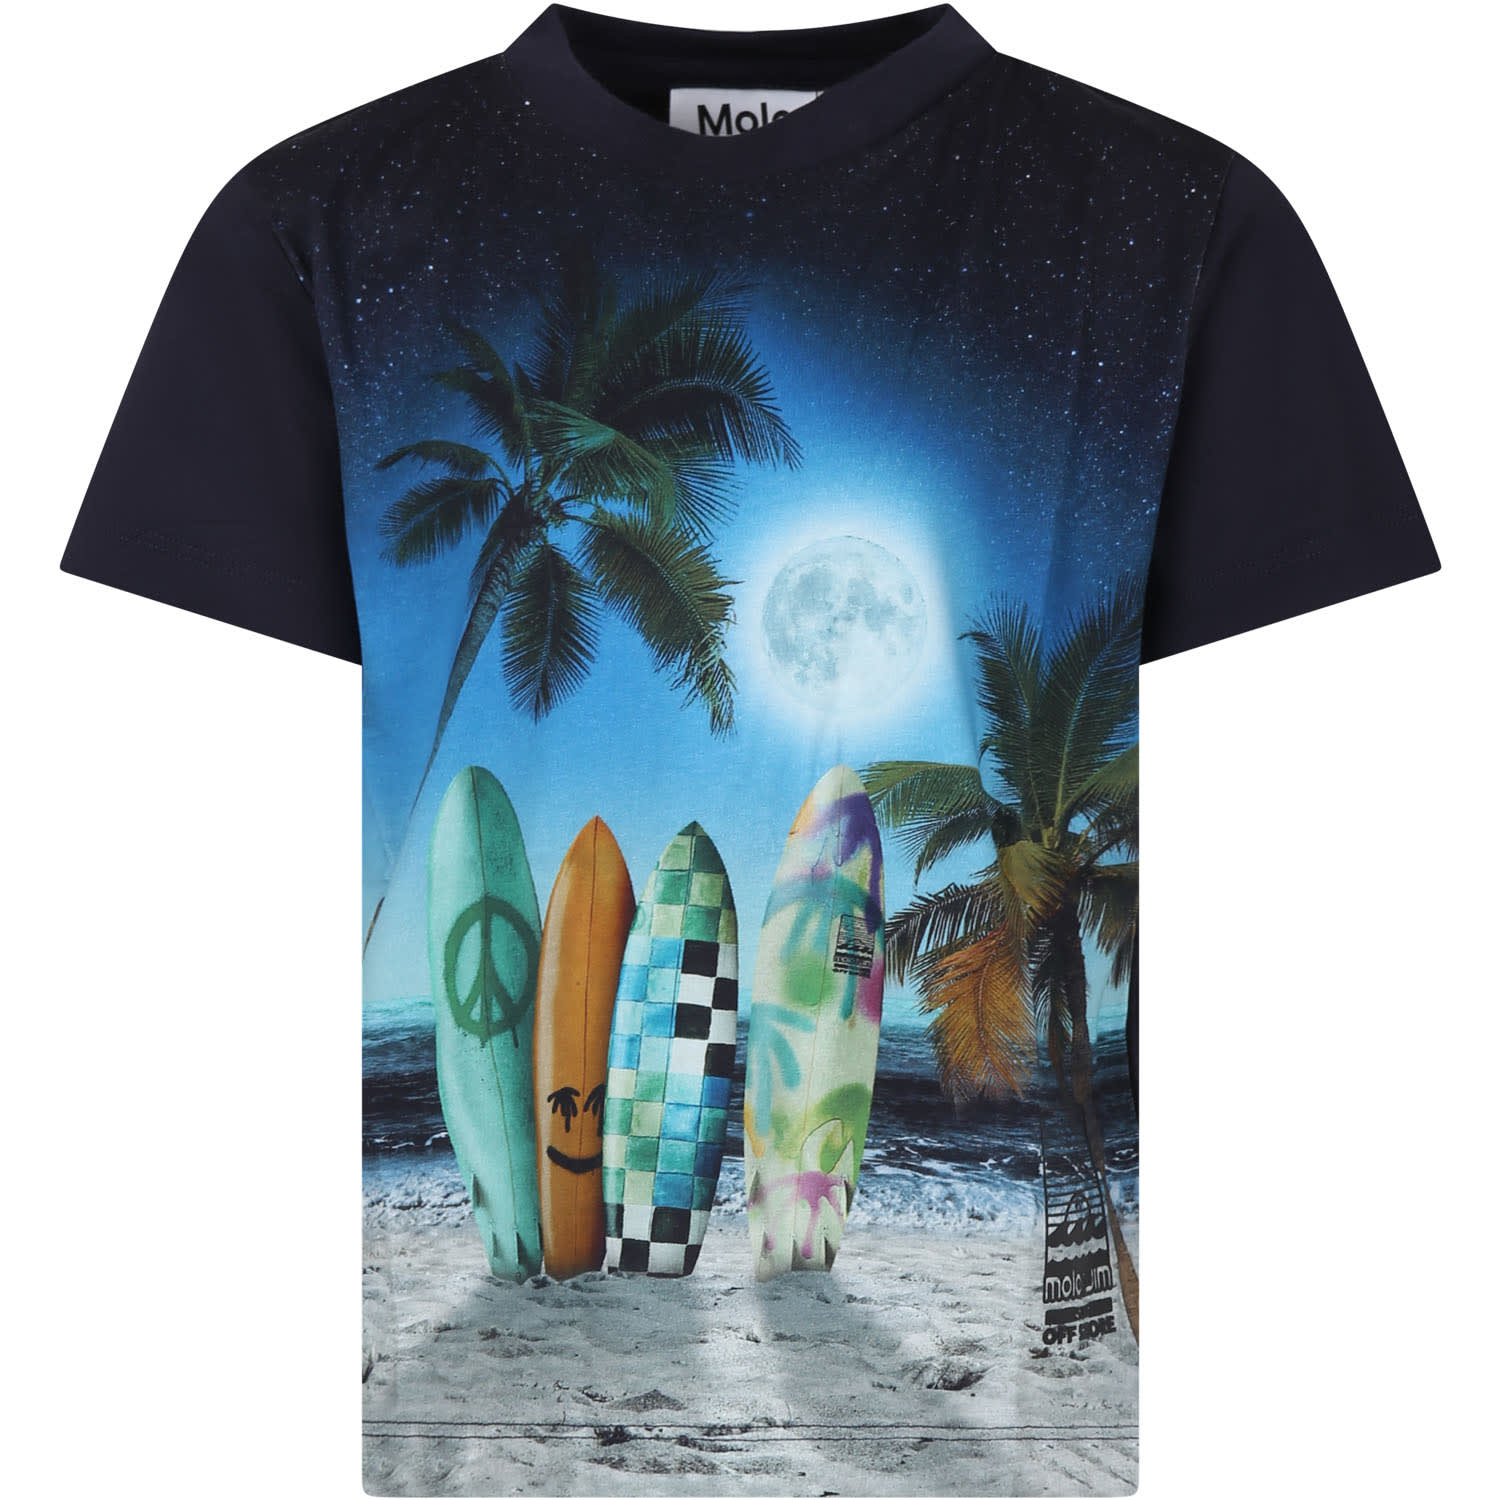 Molo Kids' Black T-shirt For Boy With Surfboard Print